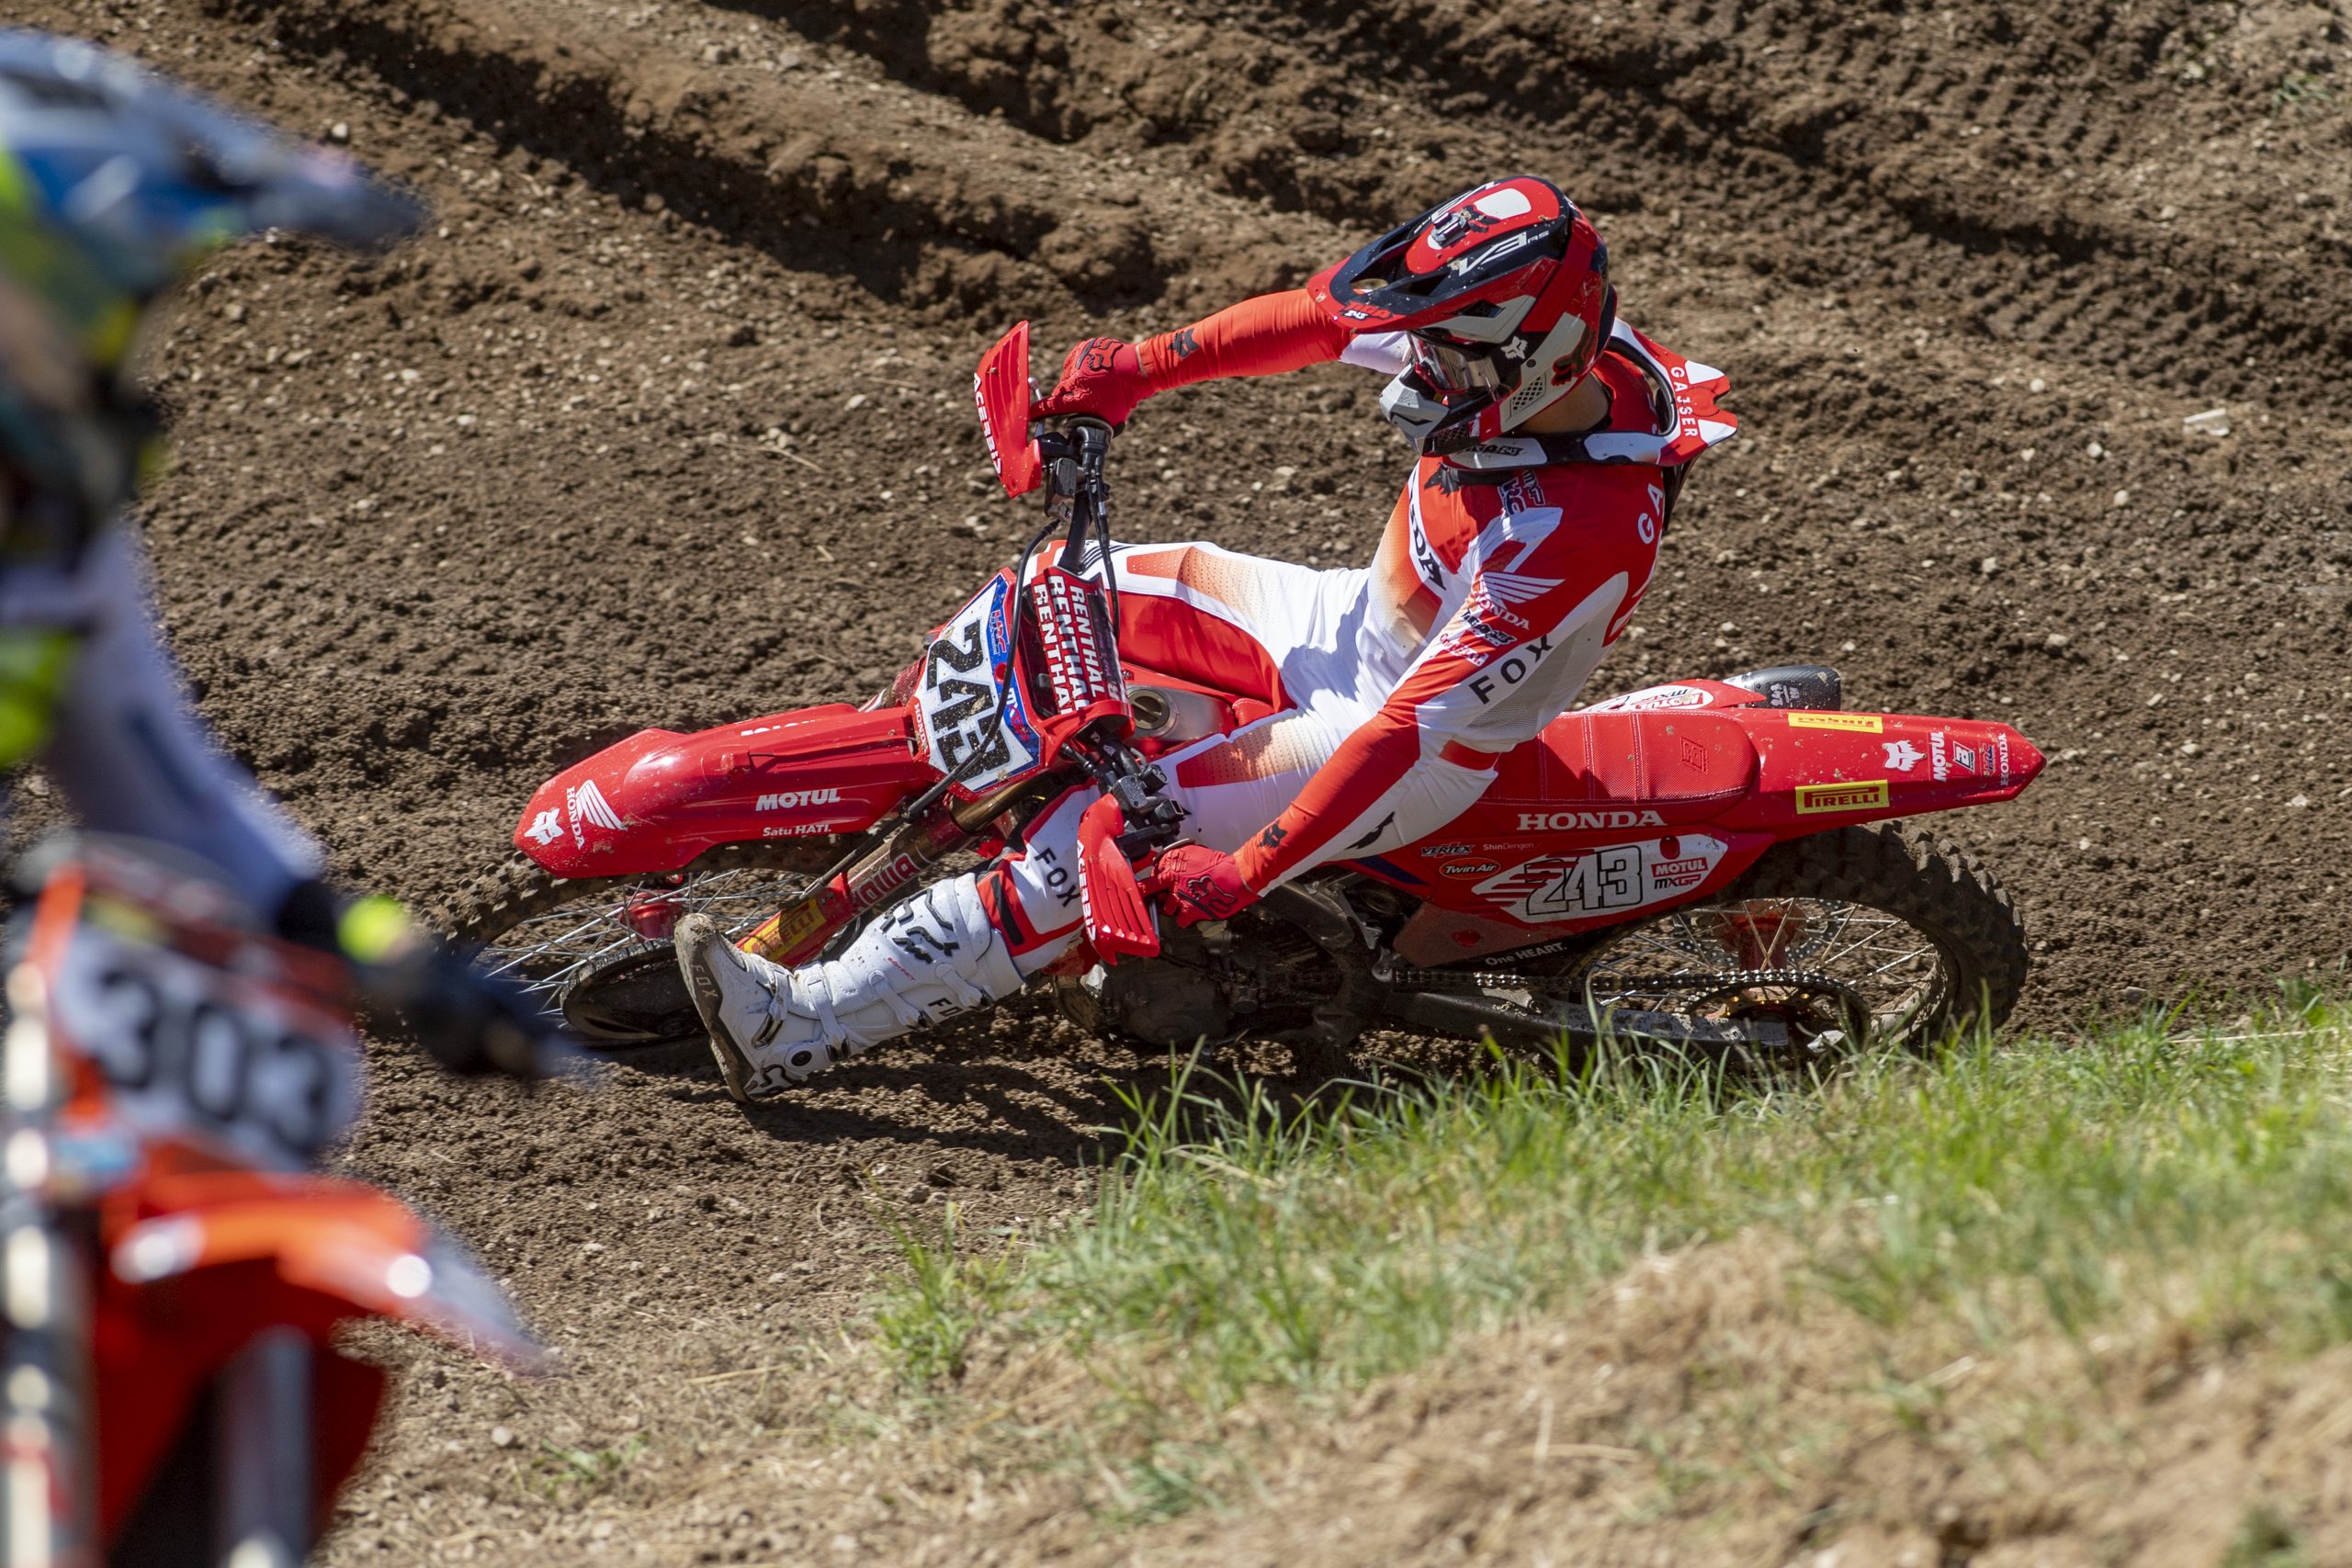 Solid performances from Fernandez and the returning Gajser at Loket